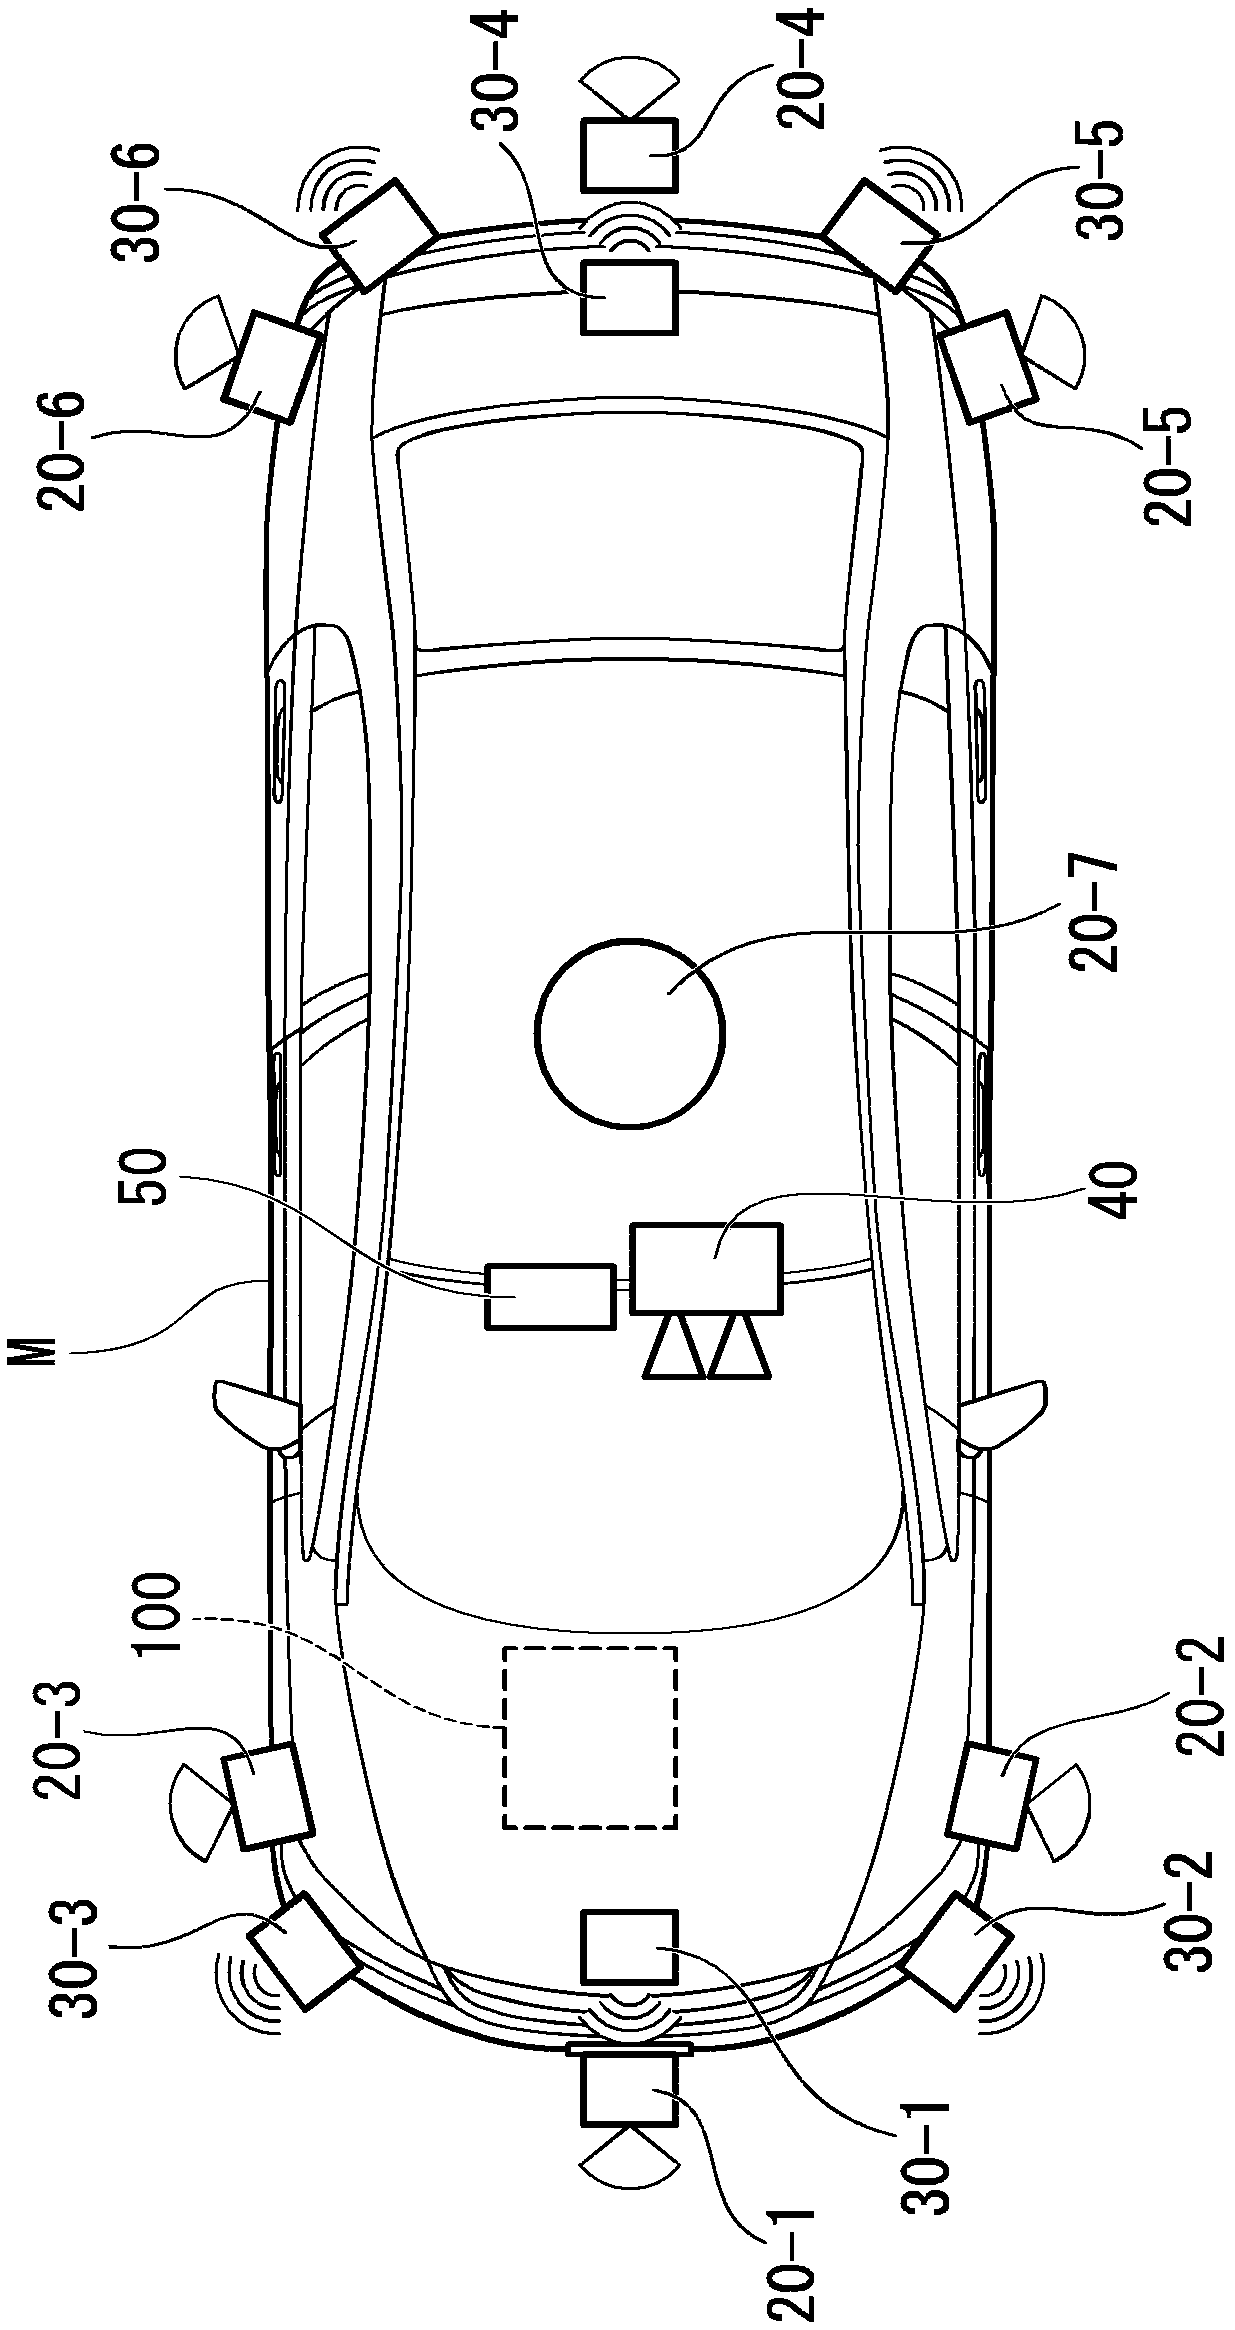 Vehicle control system, vehicle control method, and vehicle control program